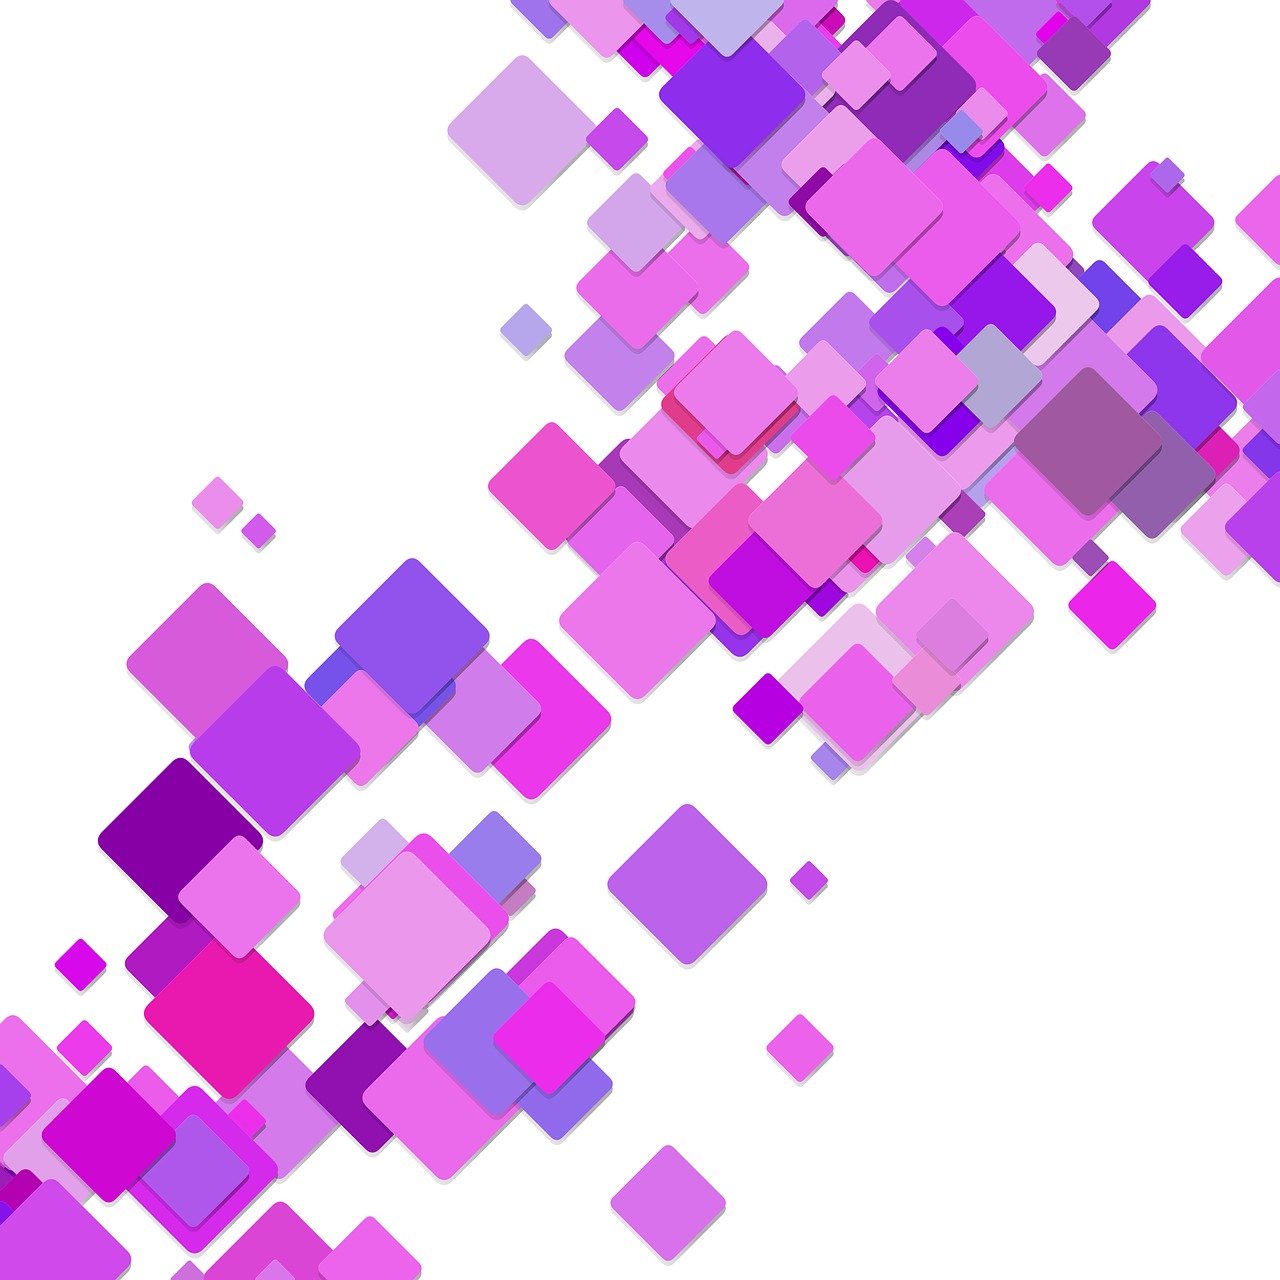 a bunch of pink and purple squares on a white background, a digital rendering, floating pieces, simple illustration, keyframe illustration, purple aethetic